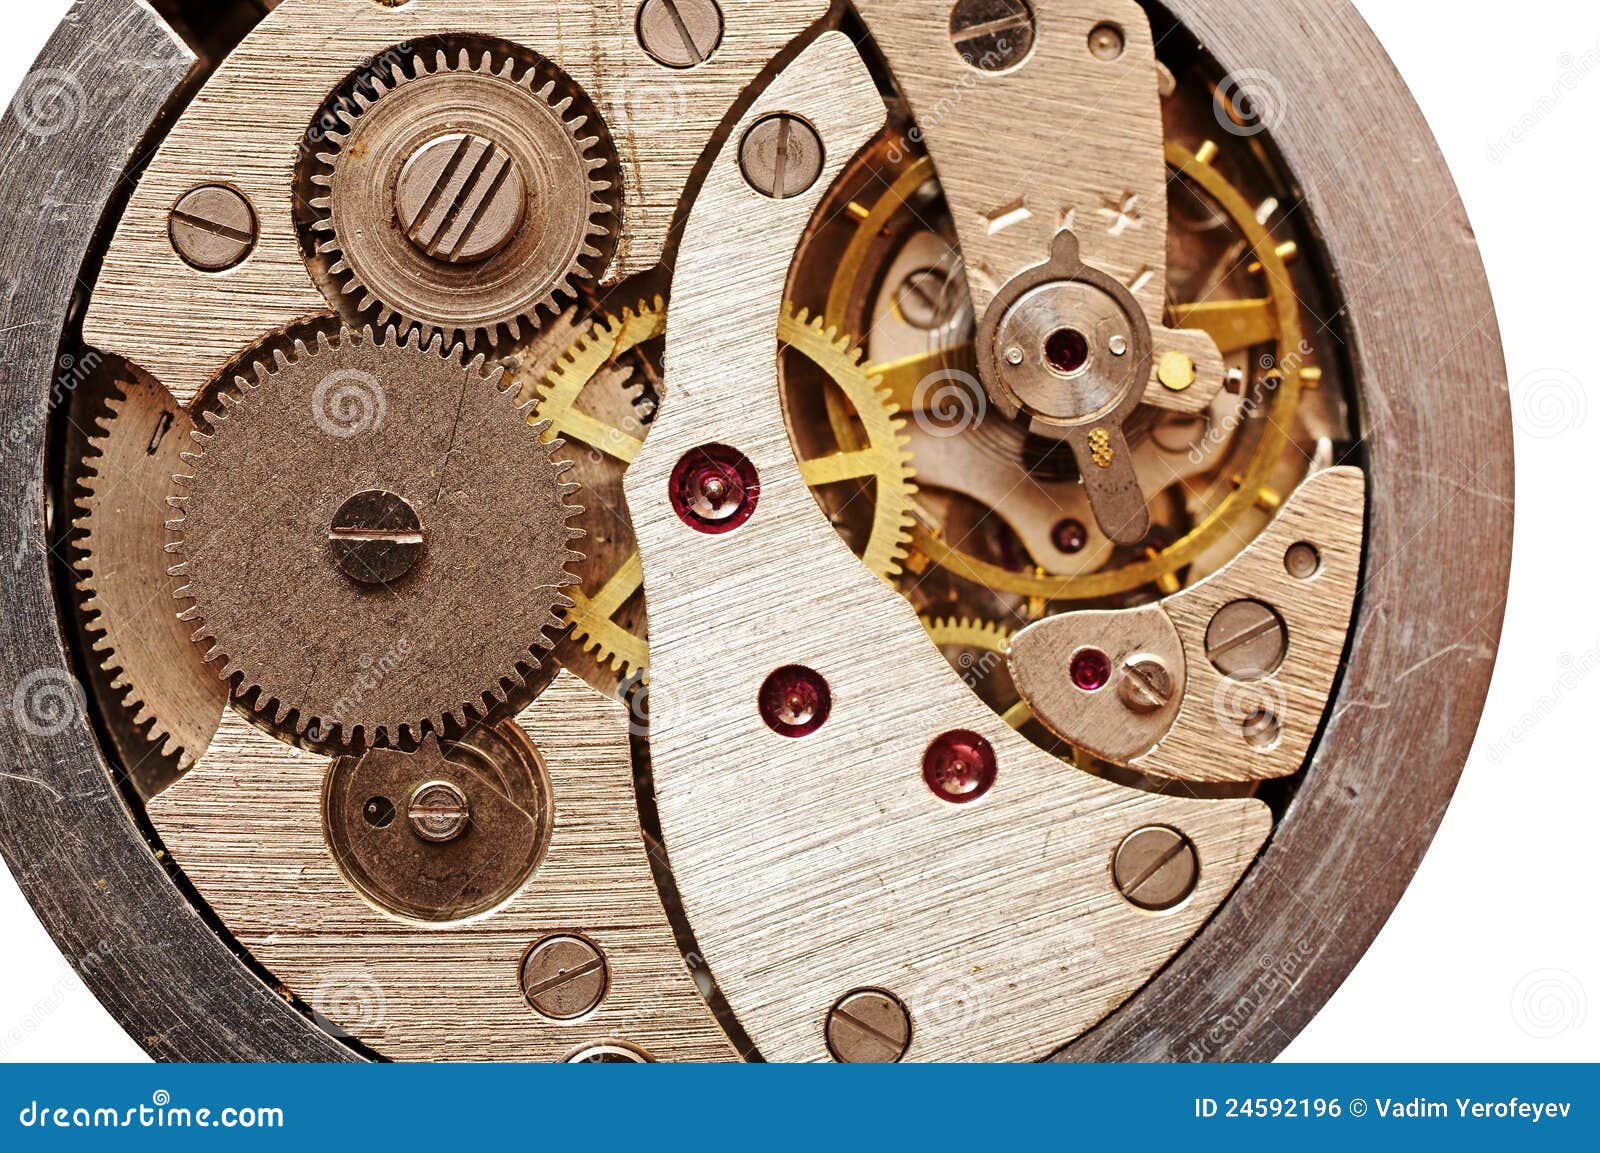 Old Pocket Watch Mechanism Royalty Free Stock Image - Image: 245921961300 x 953